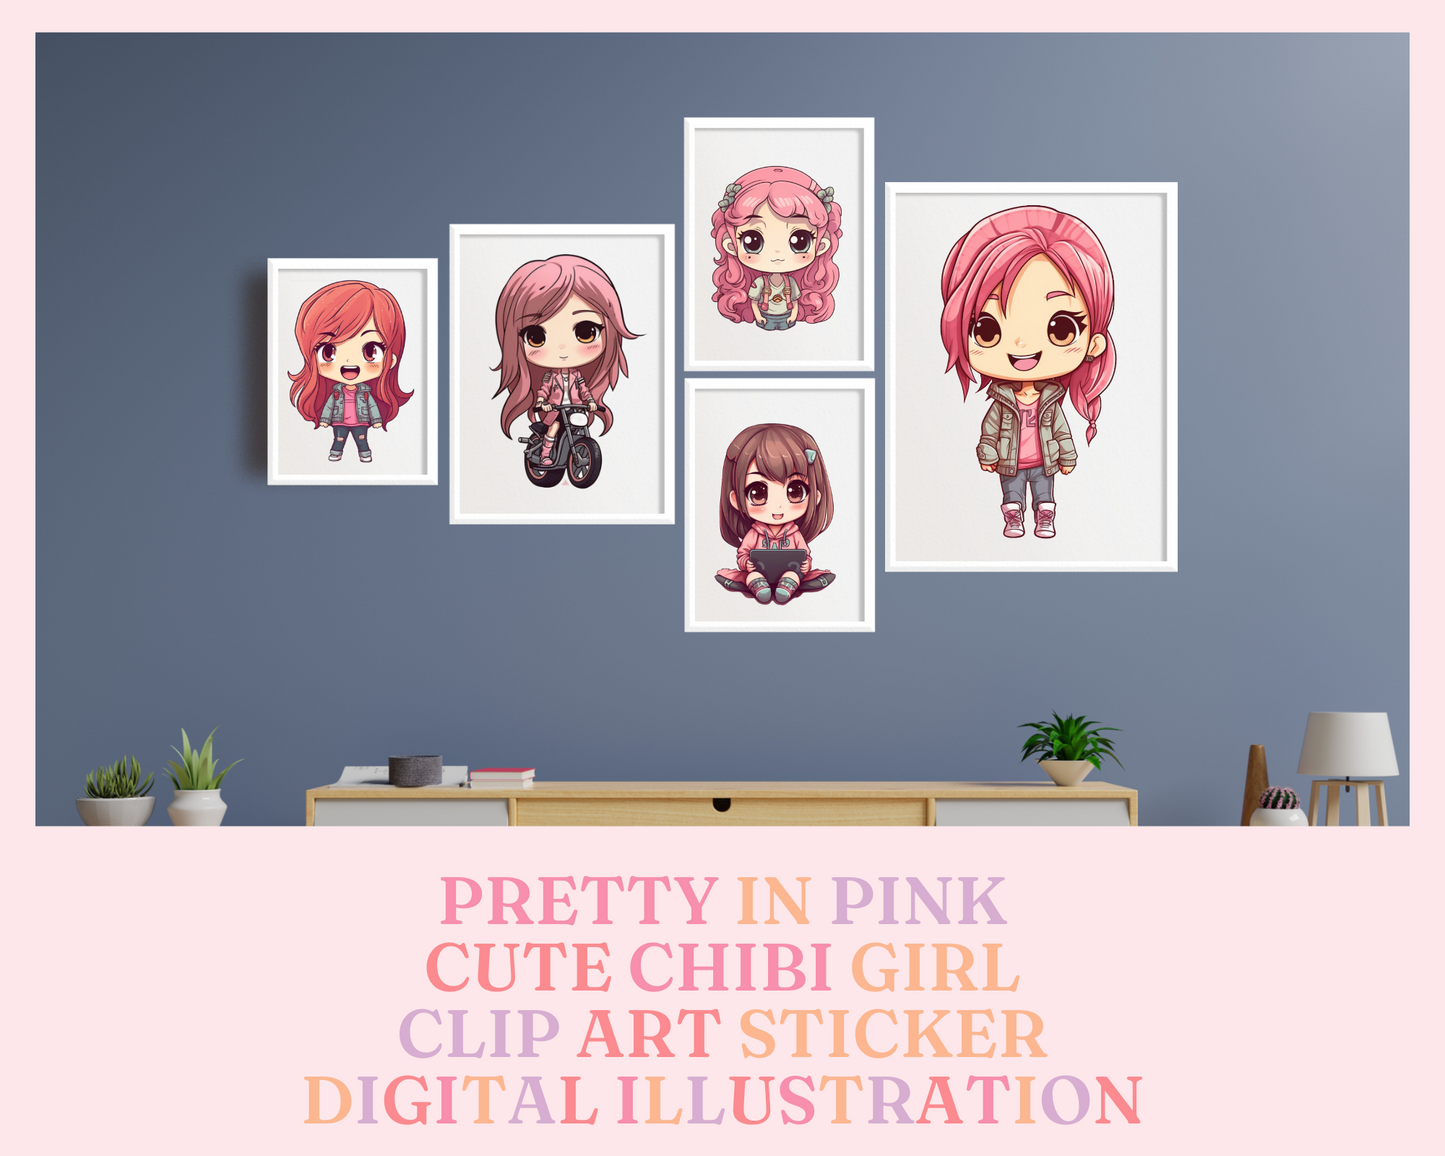 Pretty in Pink Chibi Girls Stickers Clipart – Printable – Instant Download – High-Quality PNG - Transparent Background - Commercial Use